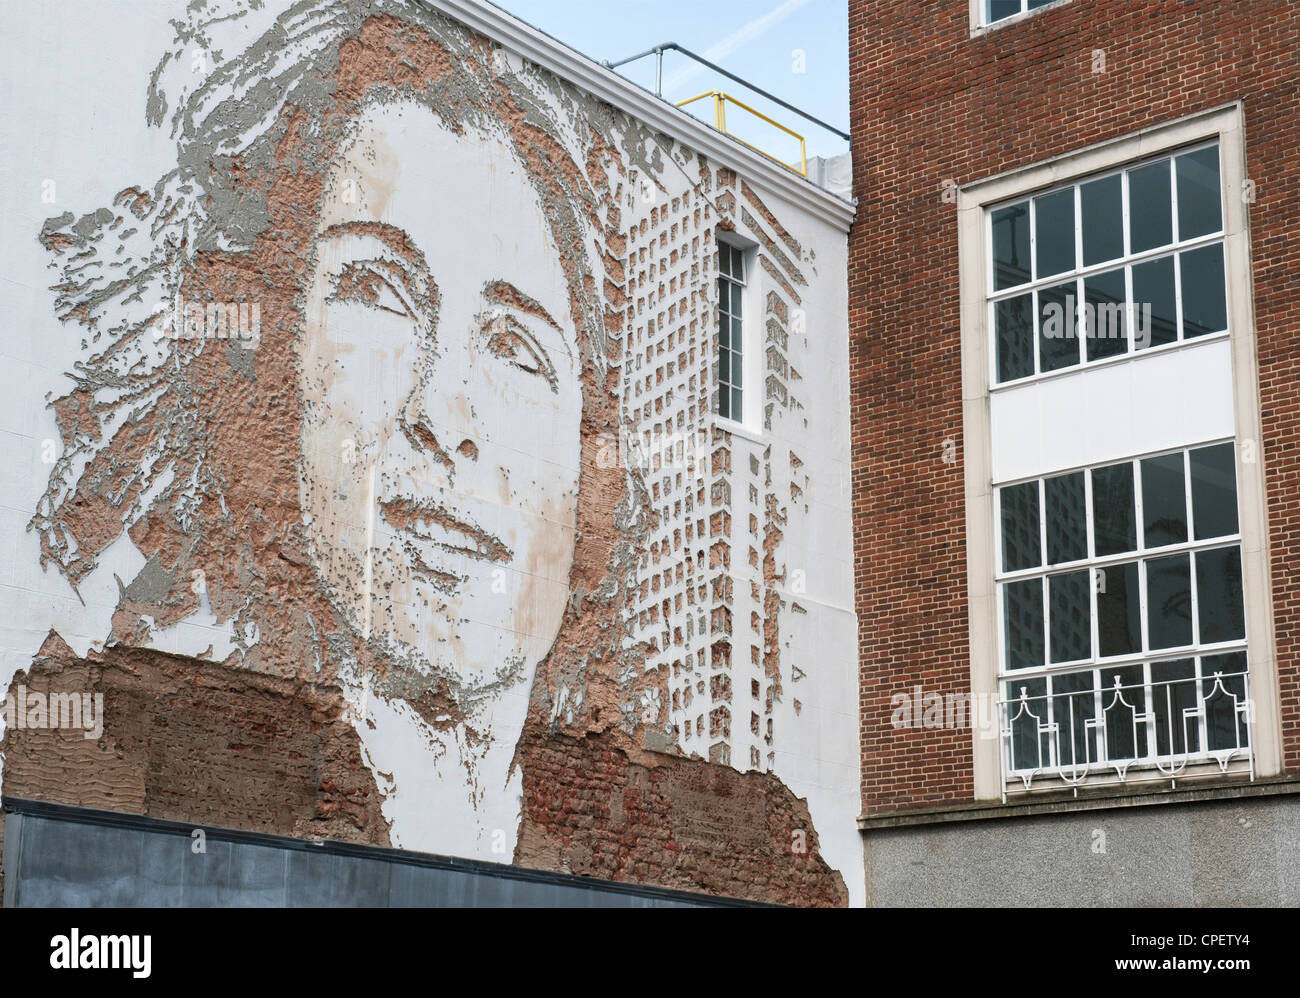 Vhils / Alexandre Farto Street art, Womans head and shoulders wall mural, Exeter, Devon, England Stock Photo